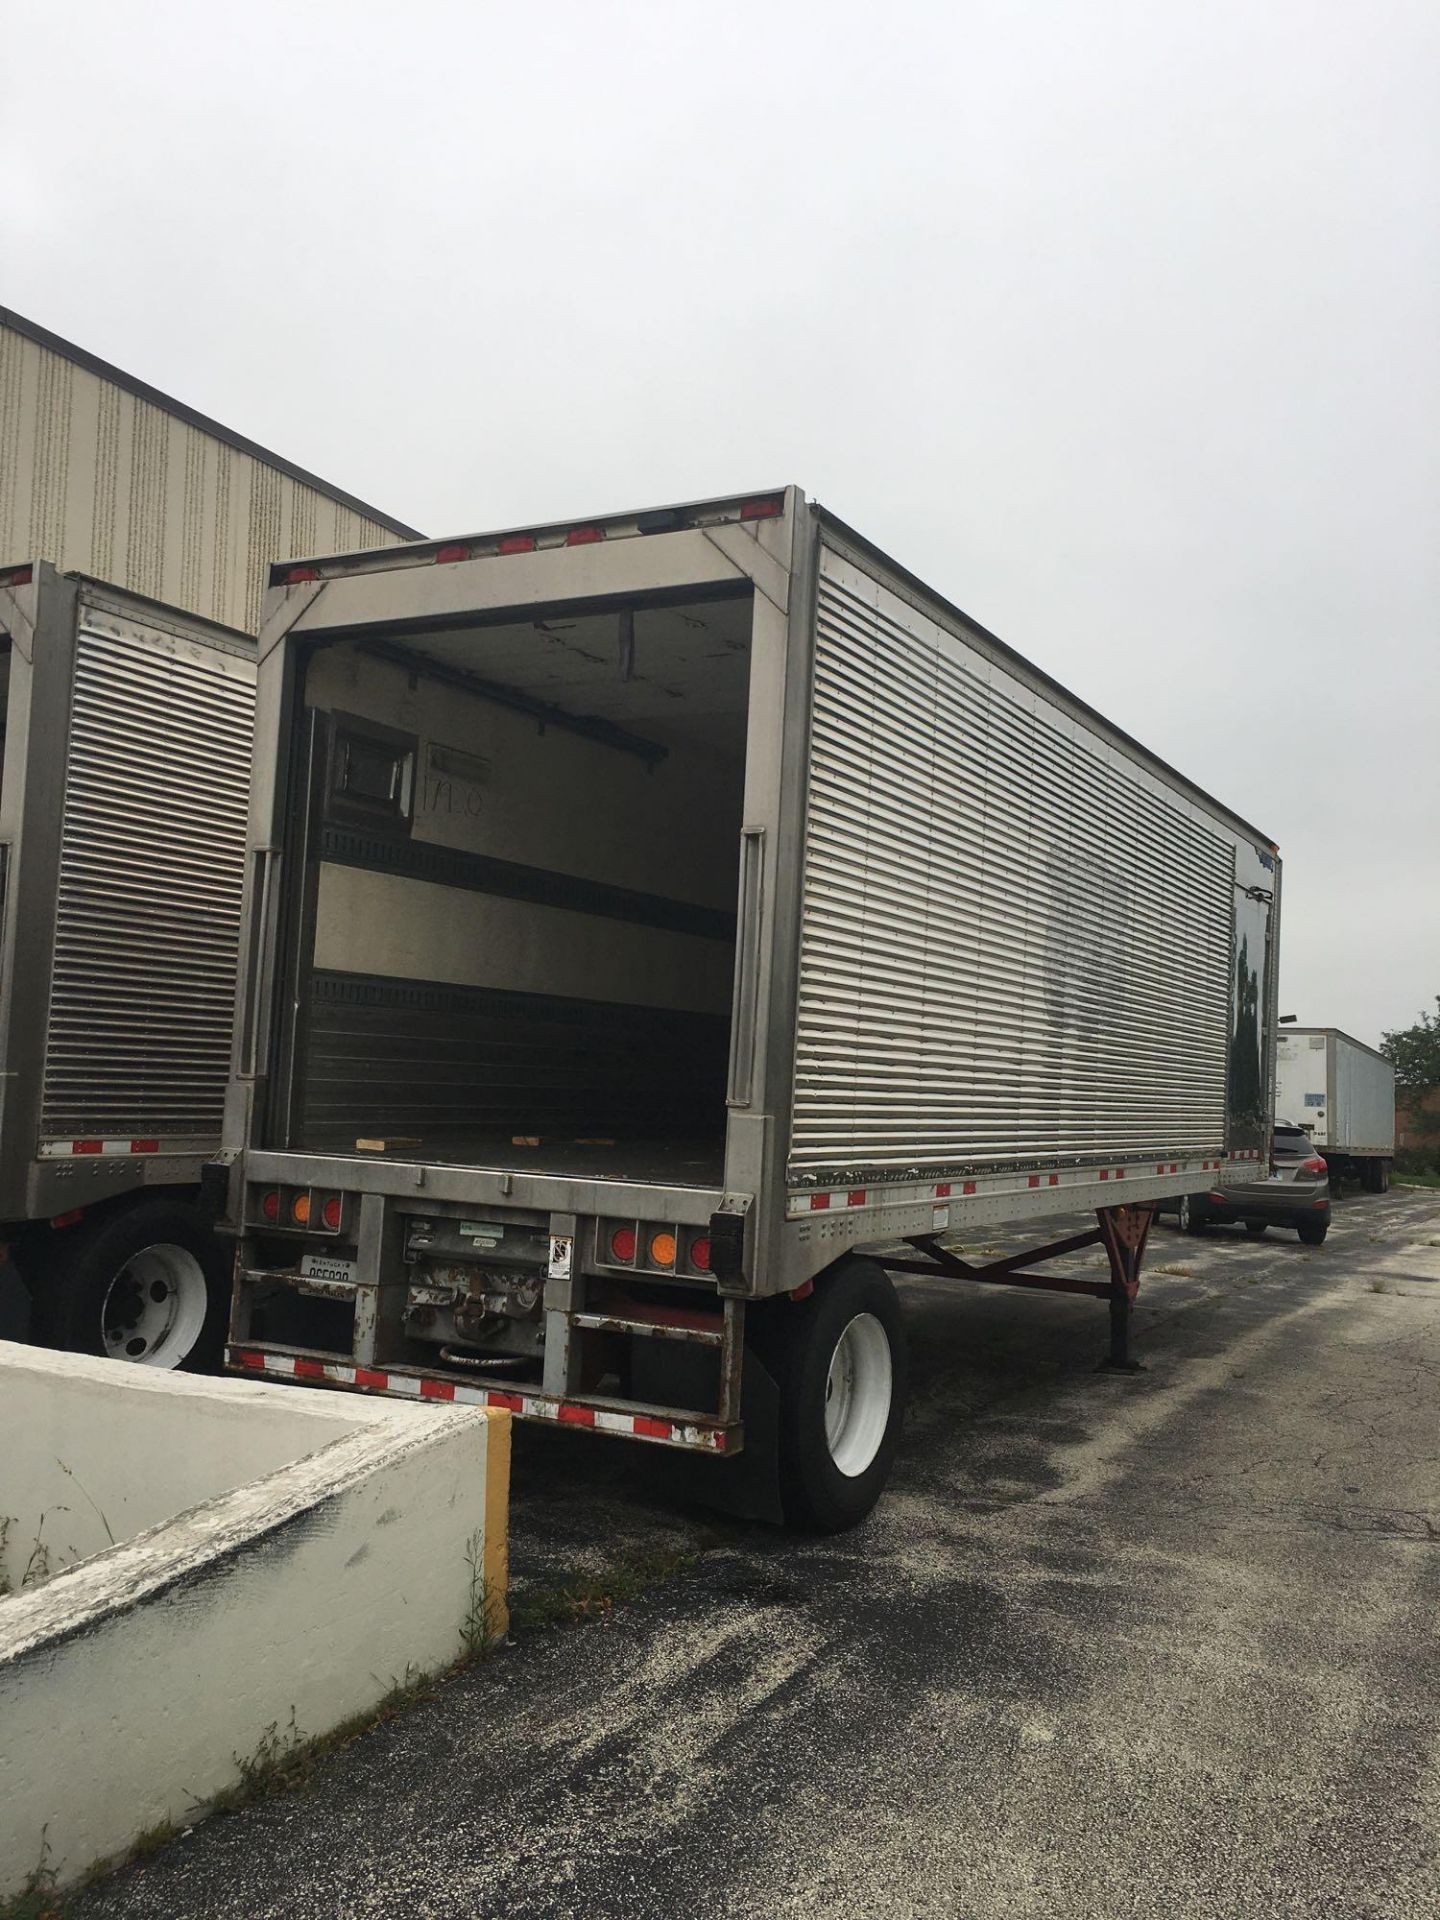 GREAT DANE 29 ft. Stainless Steel Side SA Refrigerated Trailer Carrier Refrigeration VIN 1GRAA56157S - Image 2 of 7